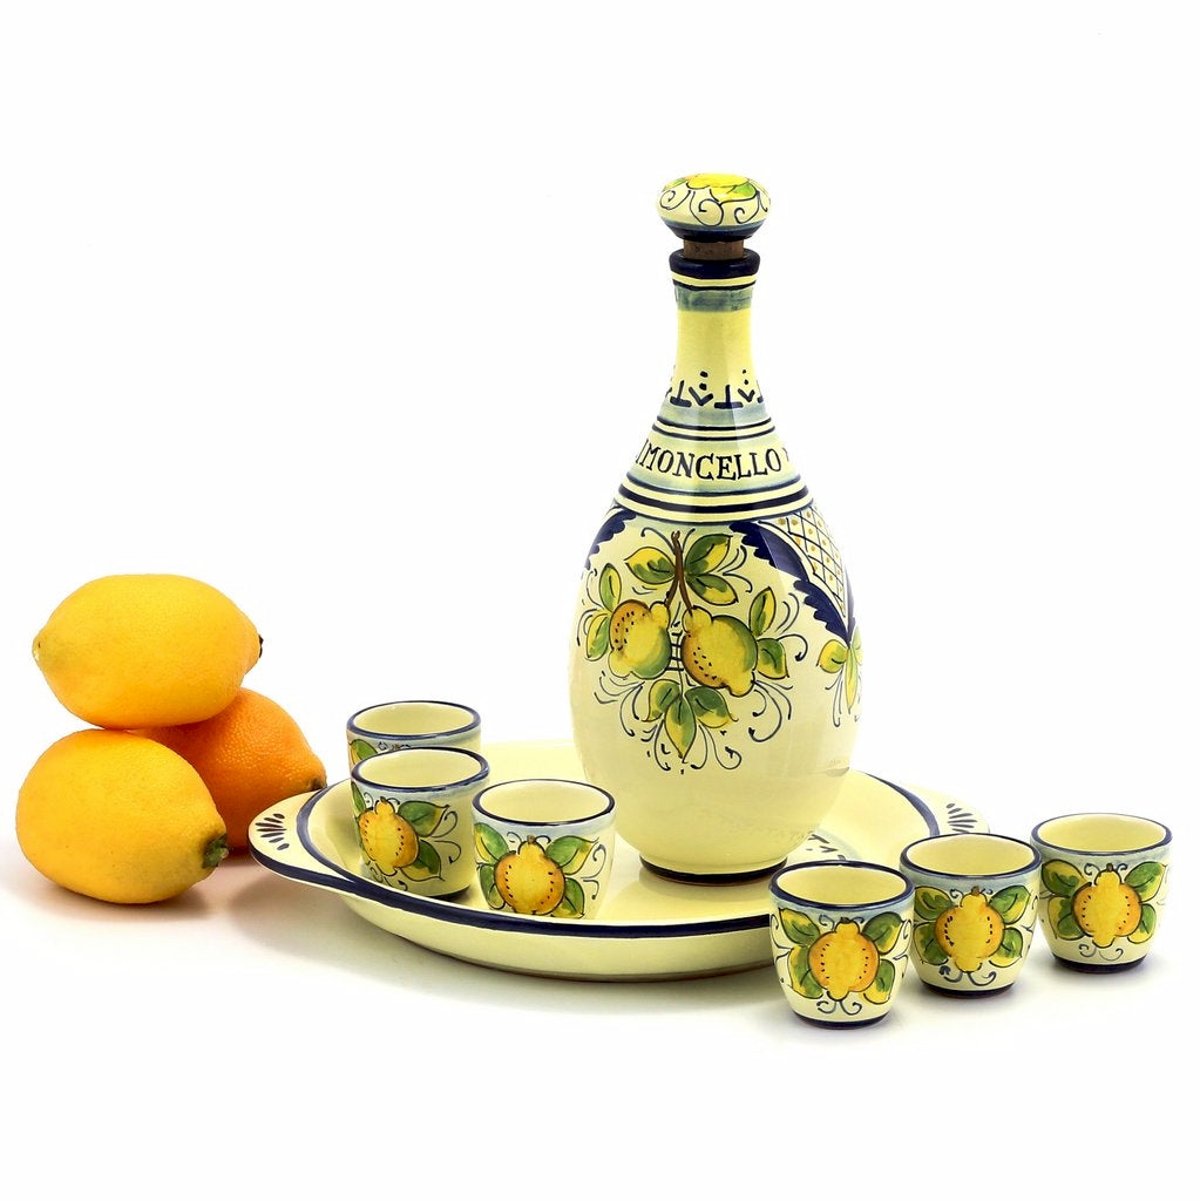 https://images.verishop.com/artistica-deruta-of-italy-limoncello-limoncello-set-with-blue-trimmings-bottle-with-stopper-and-tray-and-6-shot-glasses/M00755746607234-4017472773?auto=format&cs=strip&fit=max&w=1200